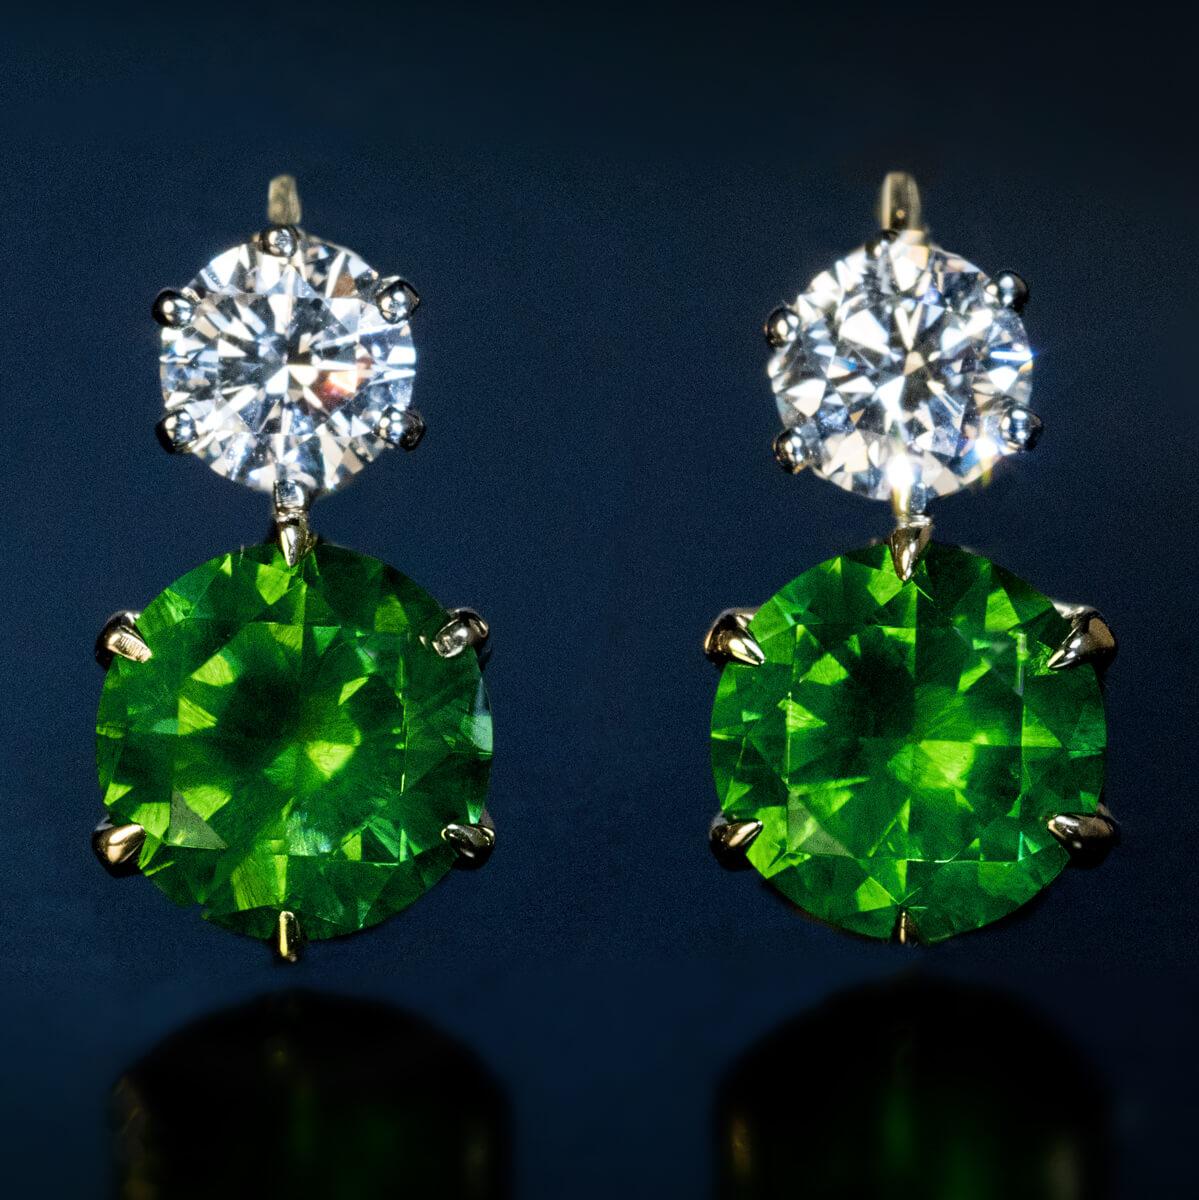 Women's Rare 4.46 Ct Russian Demantoid 1 Ct Diamond Earrings AGL and GIA Certified For Sale